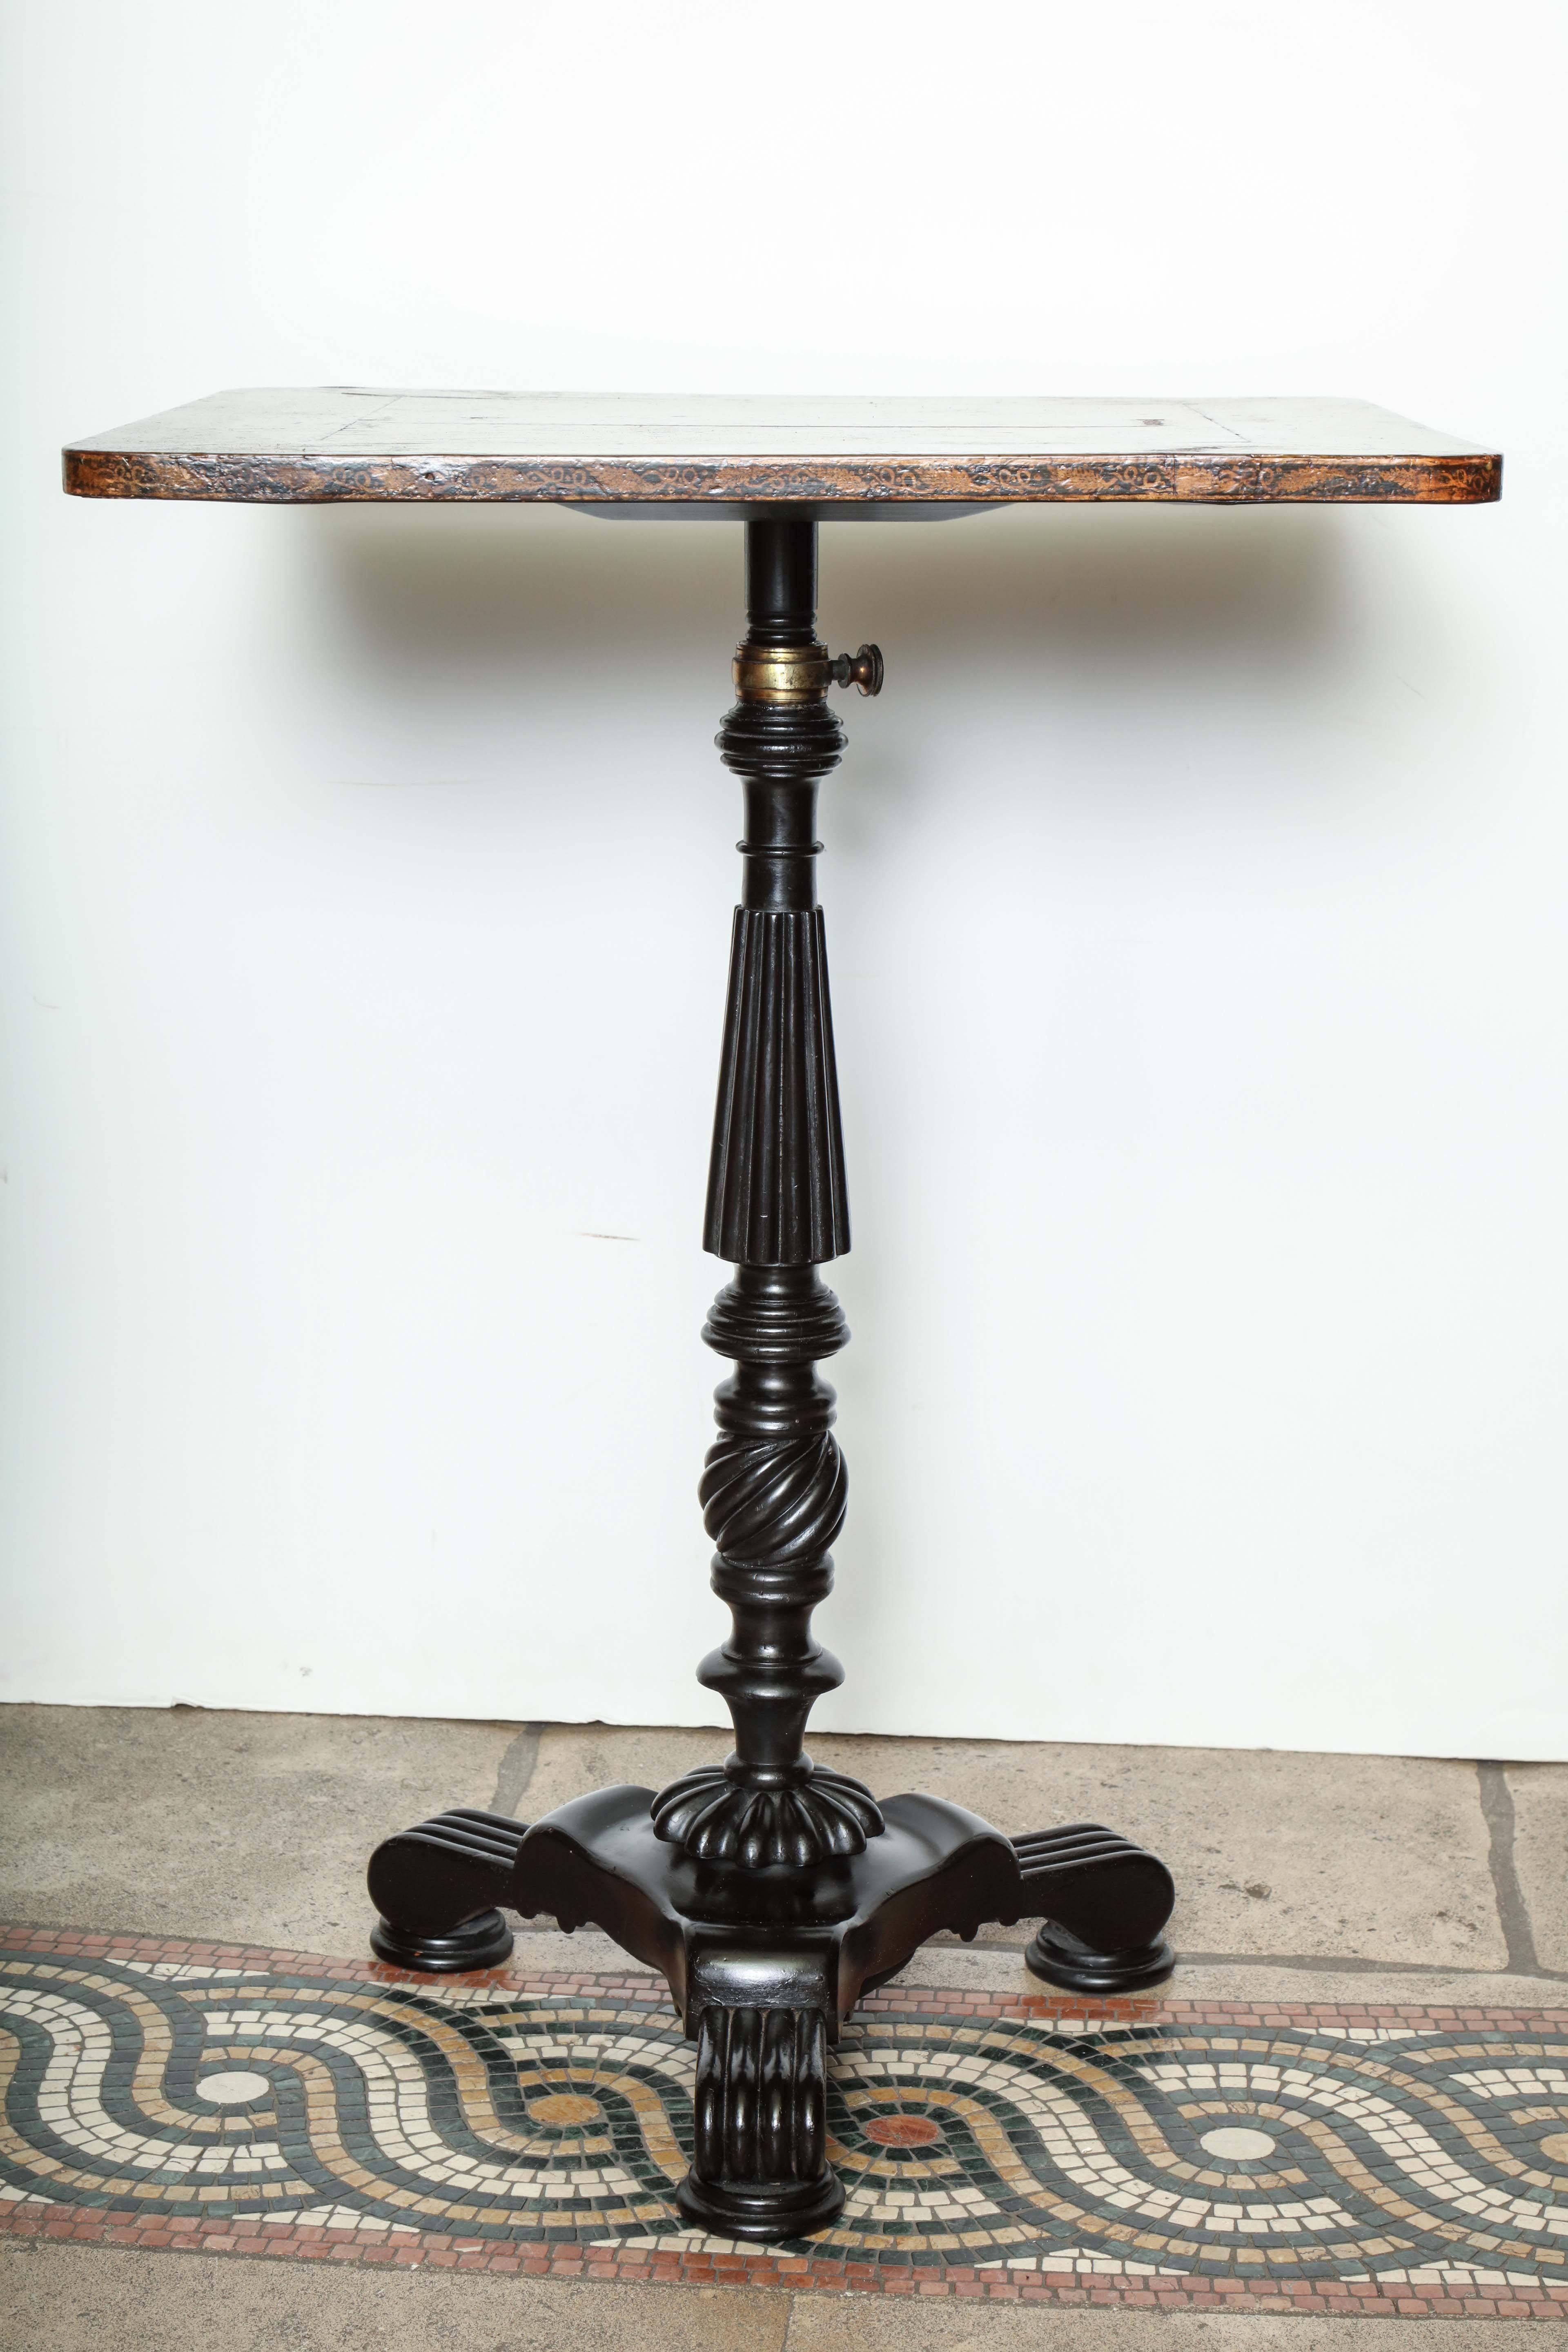 A penwork table having a height-adjustable pedestal base and a top surface decorated with animal and floral motifs.